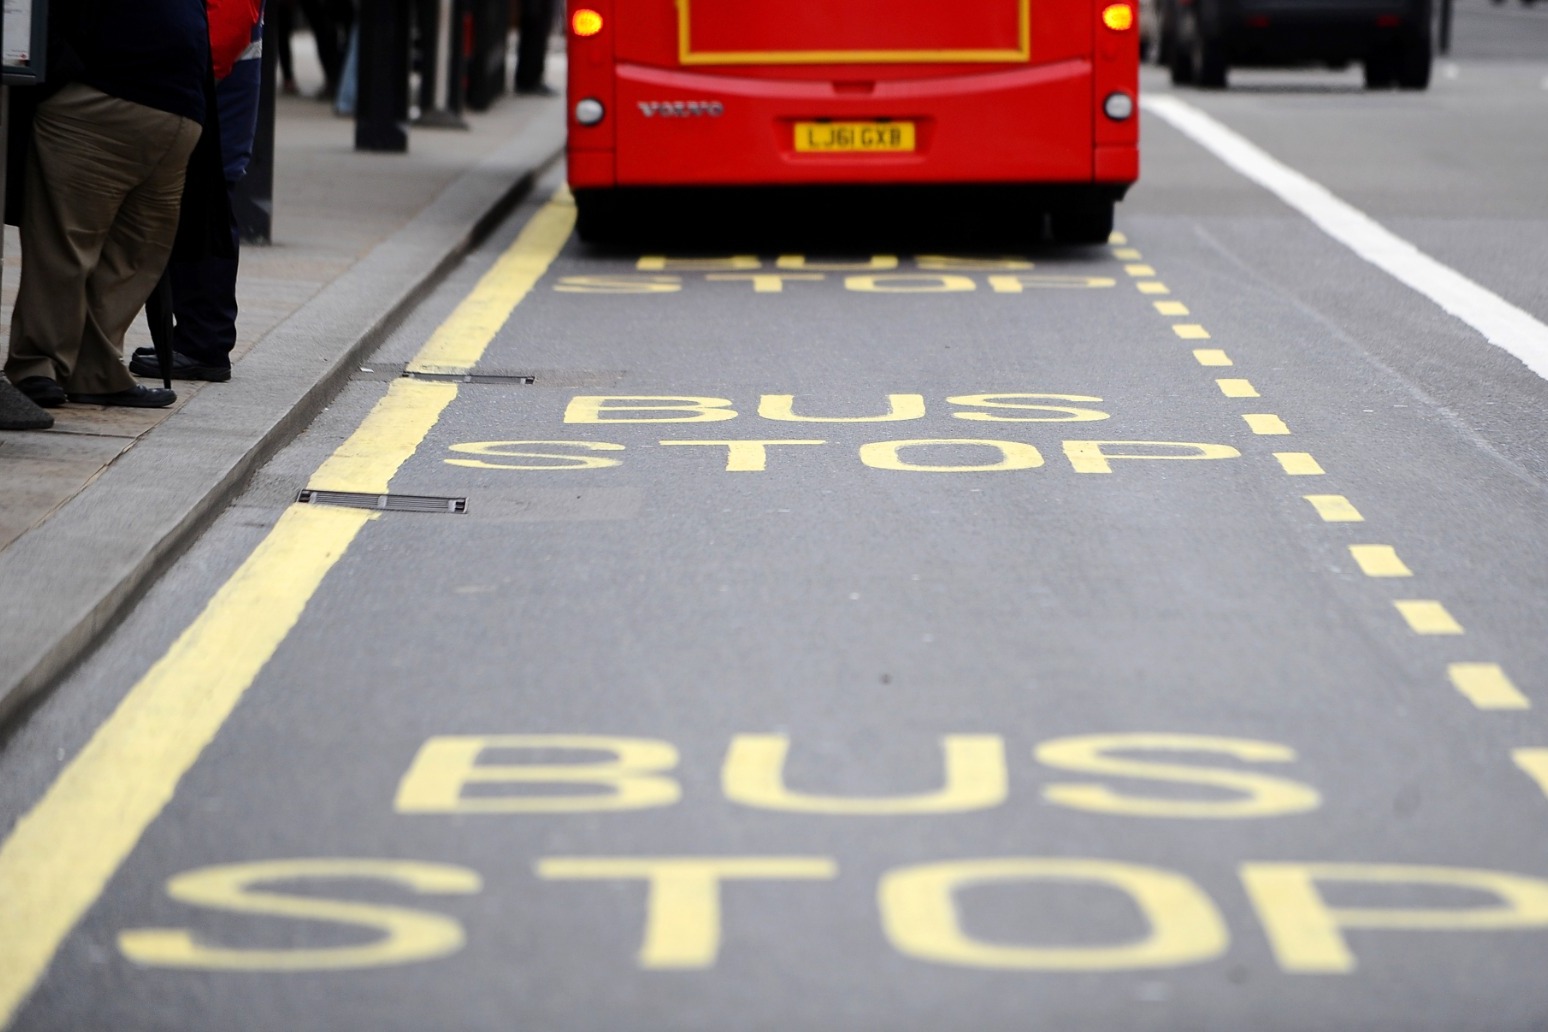 Council bus pass bill “completely unsustainable” 